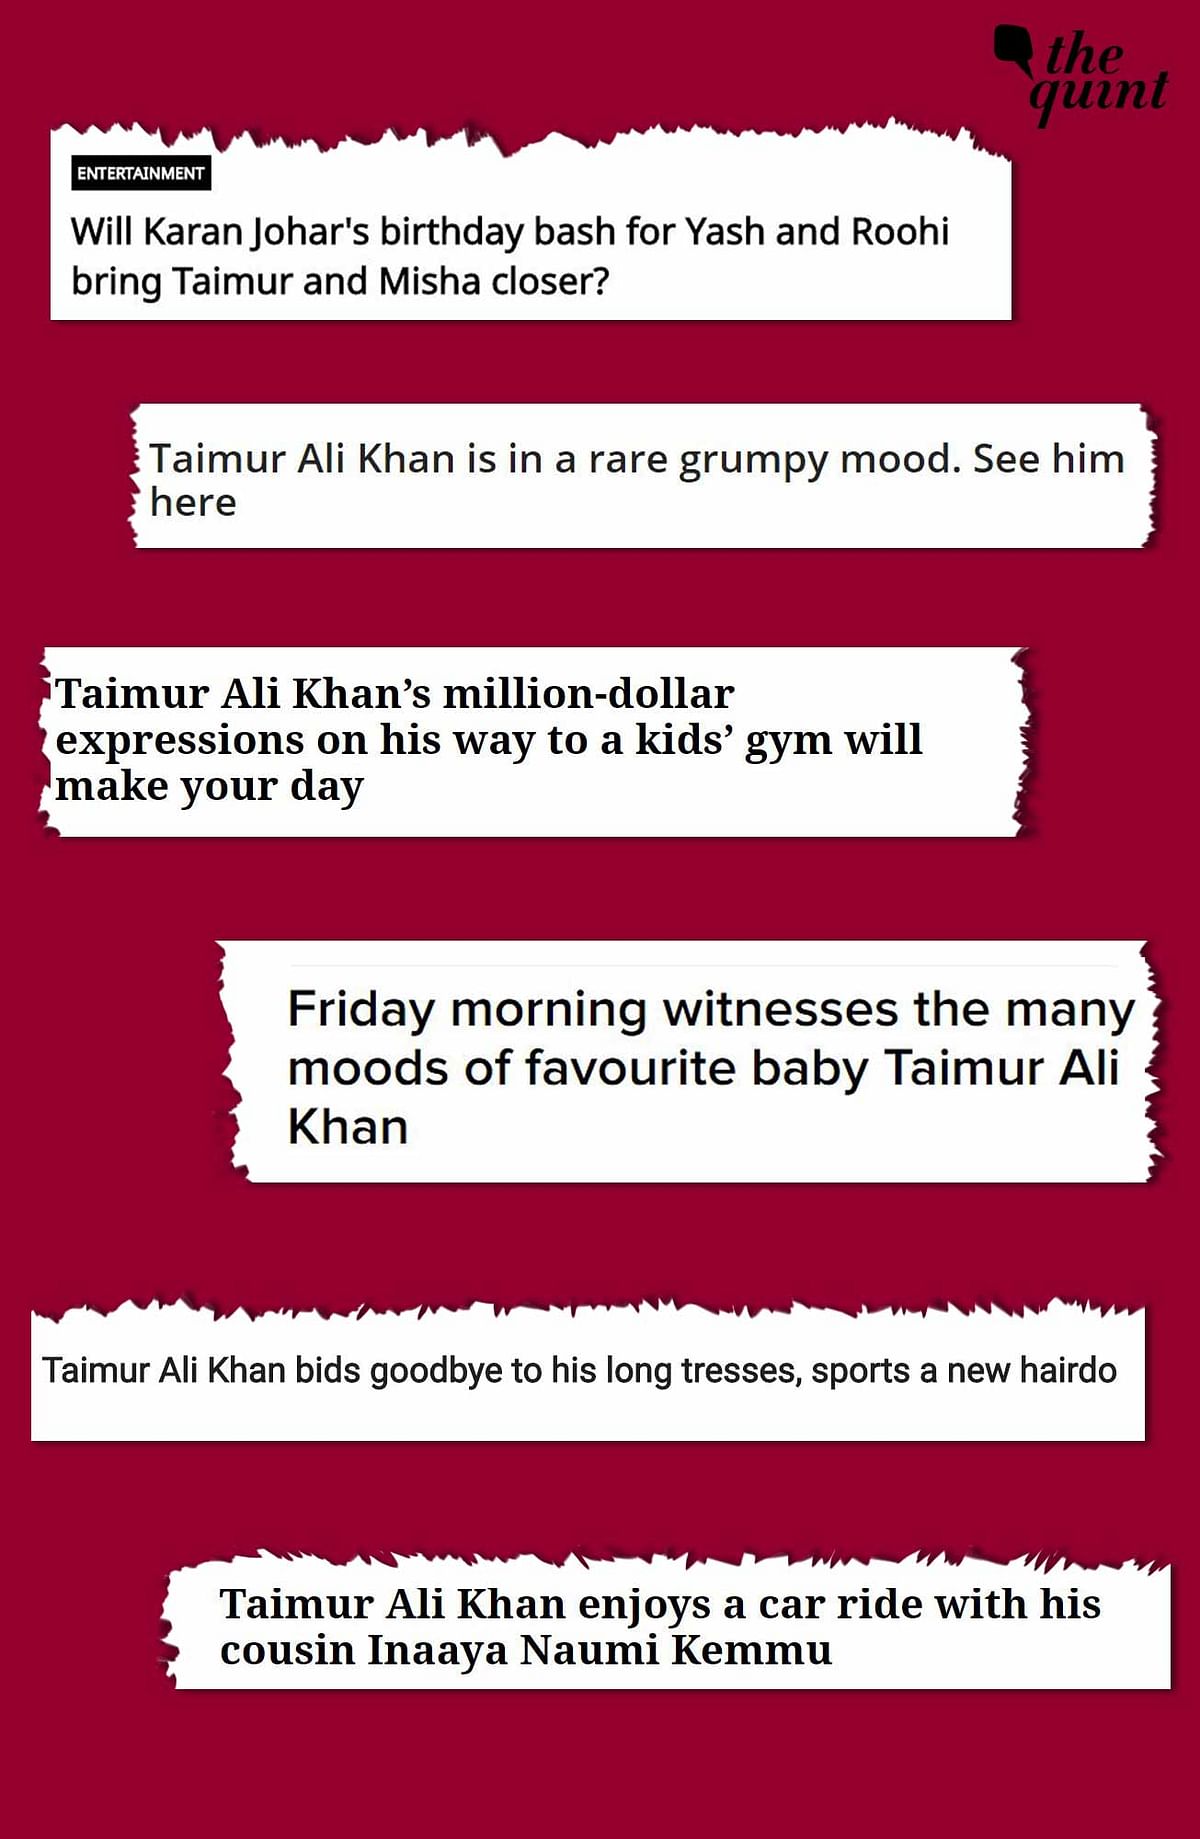 The proliferating paparazzi culture has given rise to an army of social media stars with Taimur leading the pack.